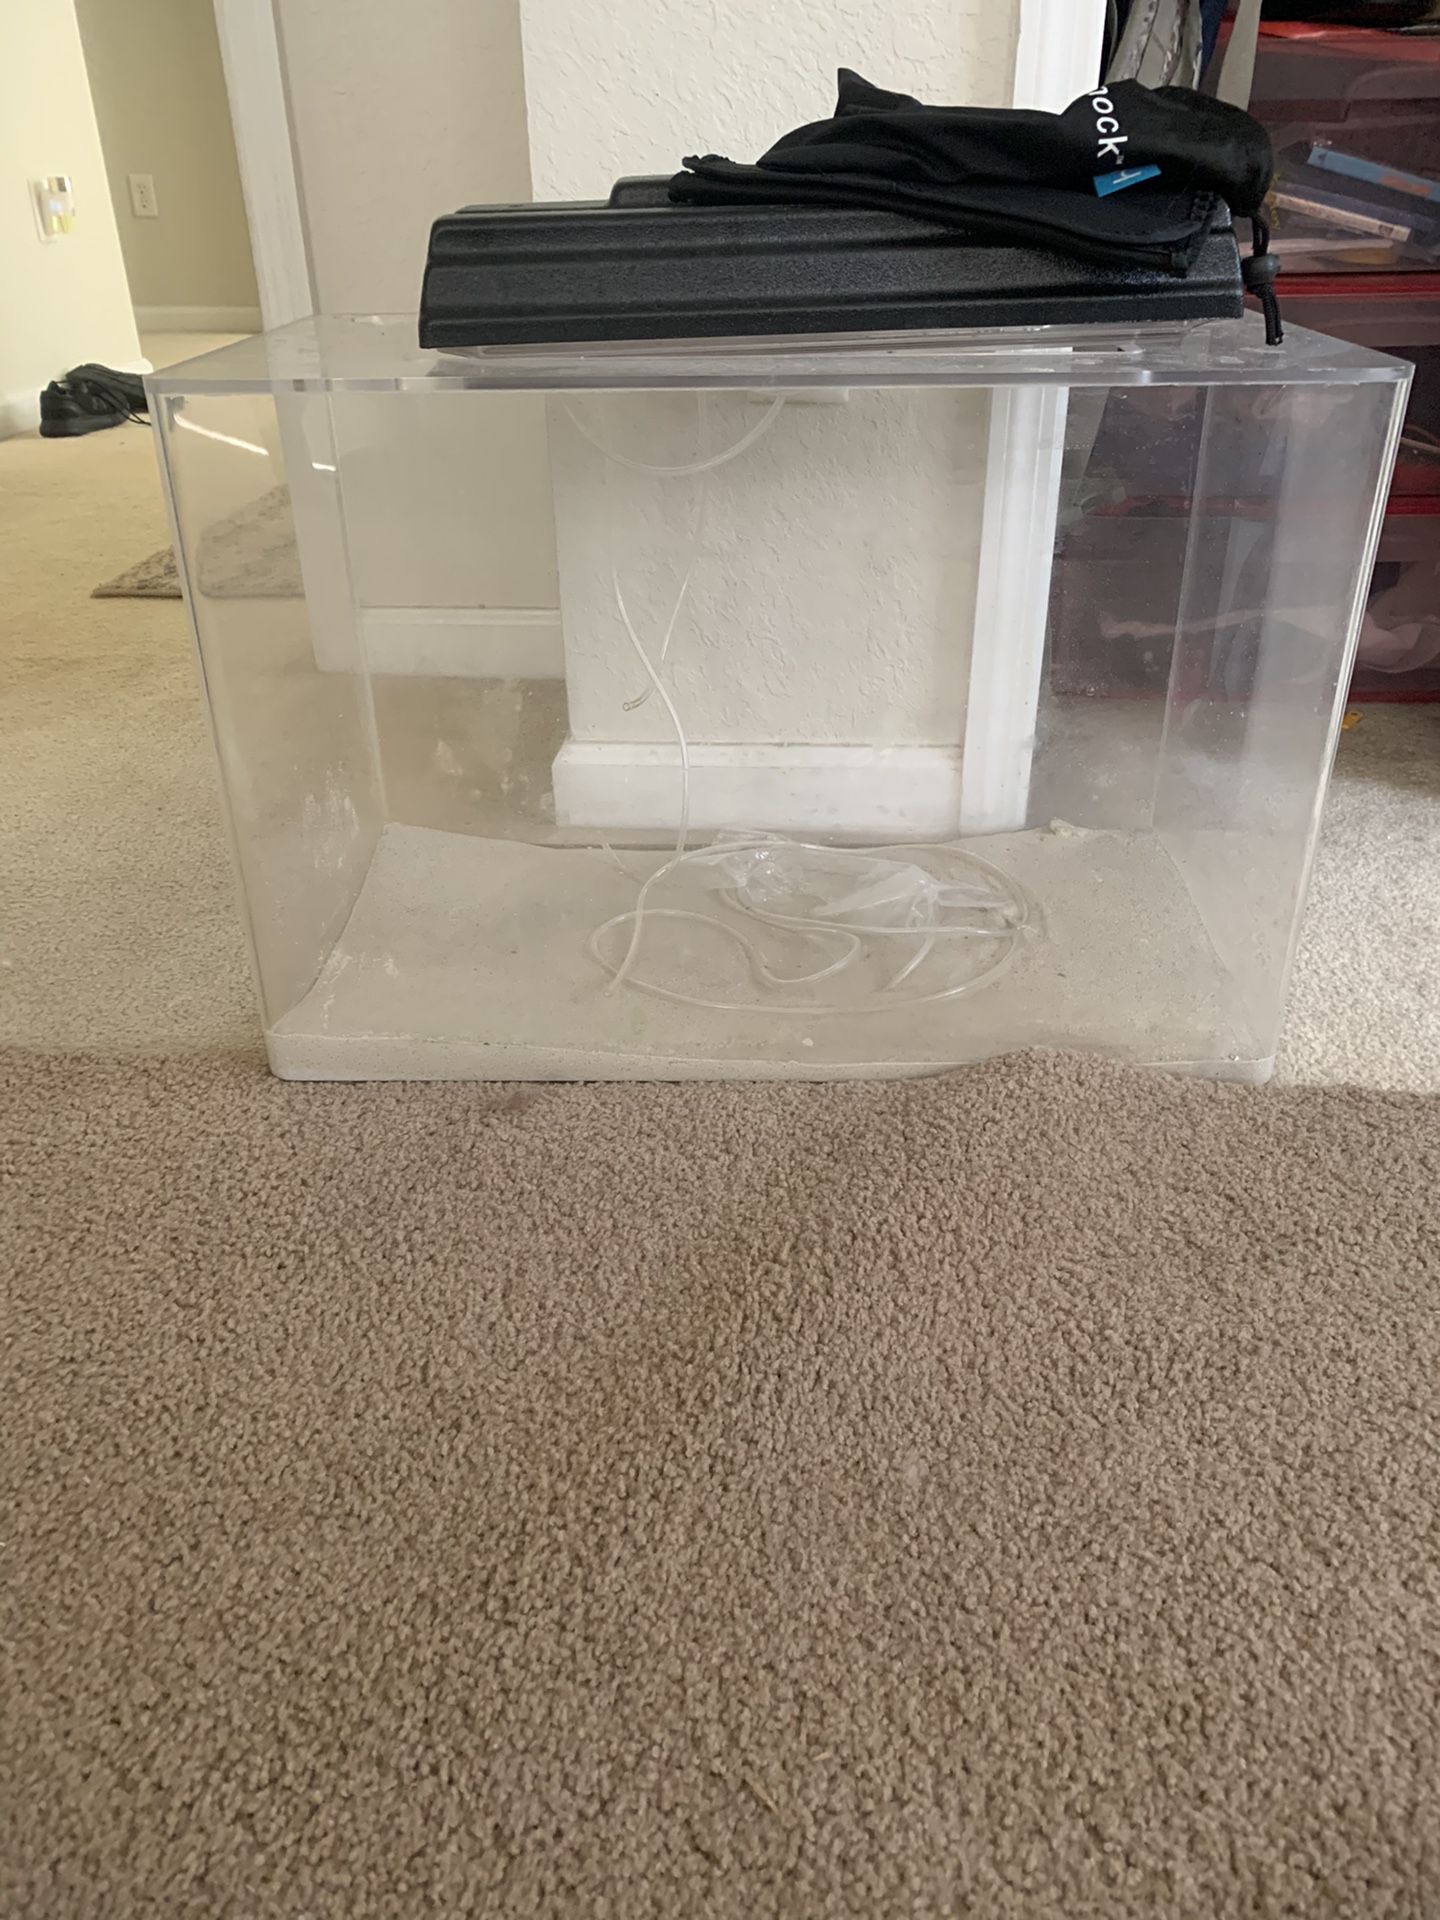 Acrylic 20 gal fish tank with everything